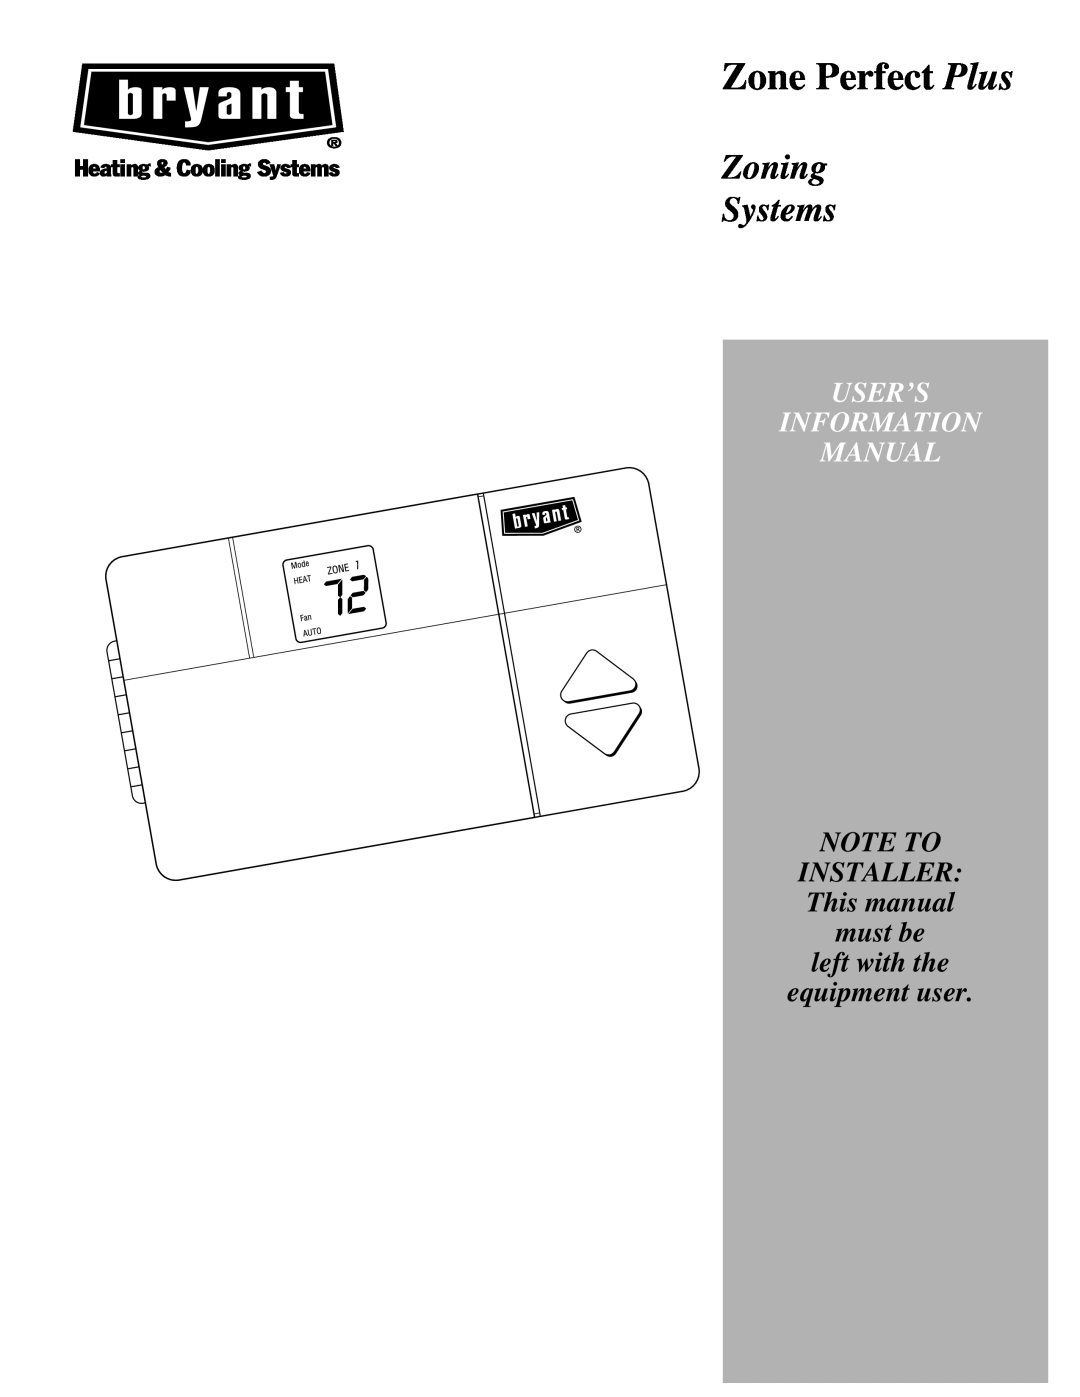 Bryant A96447 manual Zone Perfect Plus, Zoning Systems, User’S Information Manual, NOTE TO INSTALLER This manual must be 